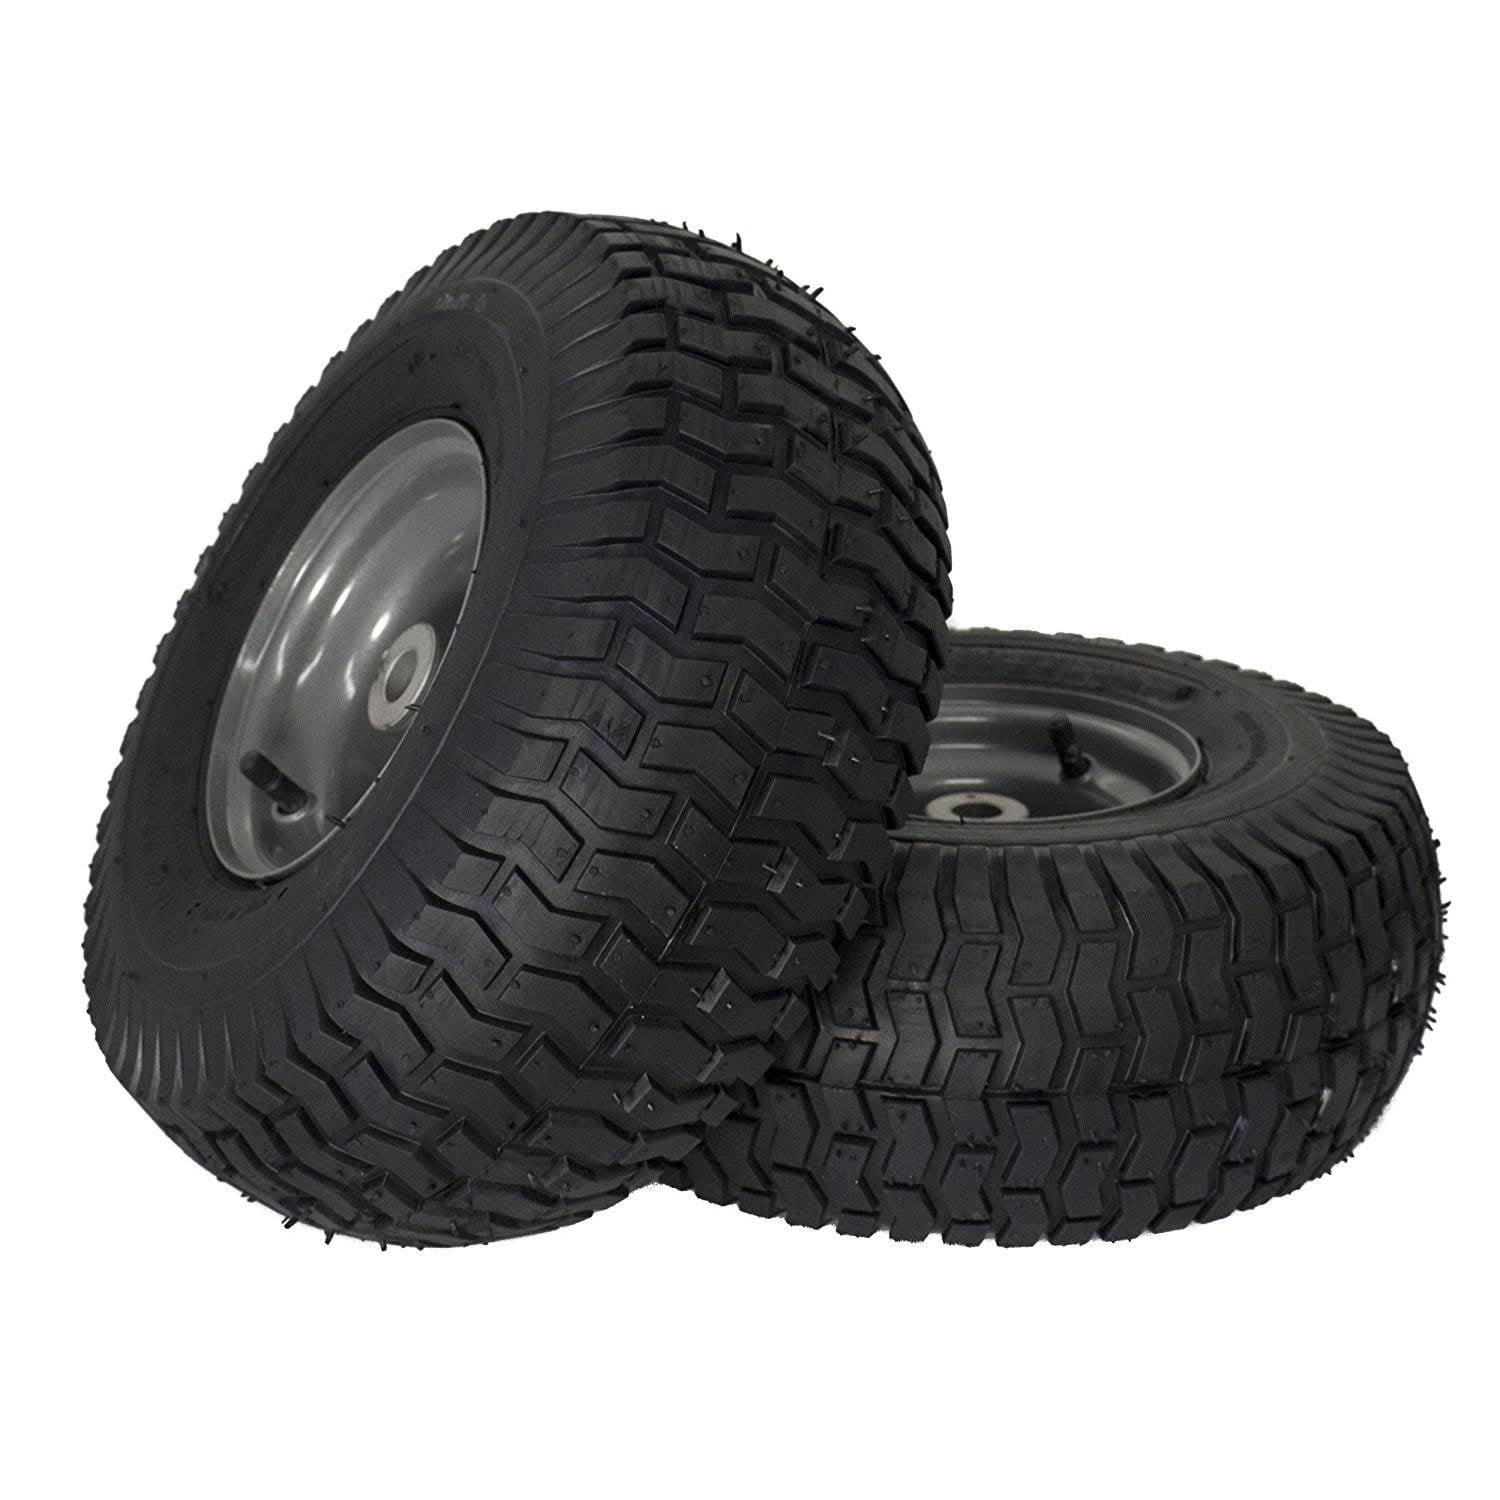 Major 15X6.00-6 6-Ply Tubeless Lawn Mower Tractor Tires Black for sale online 